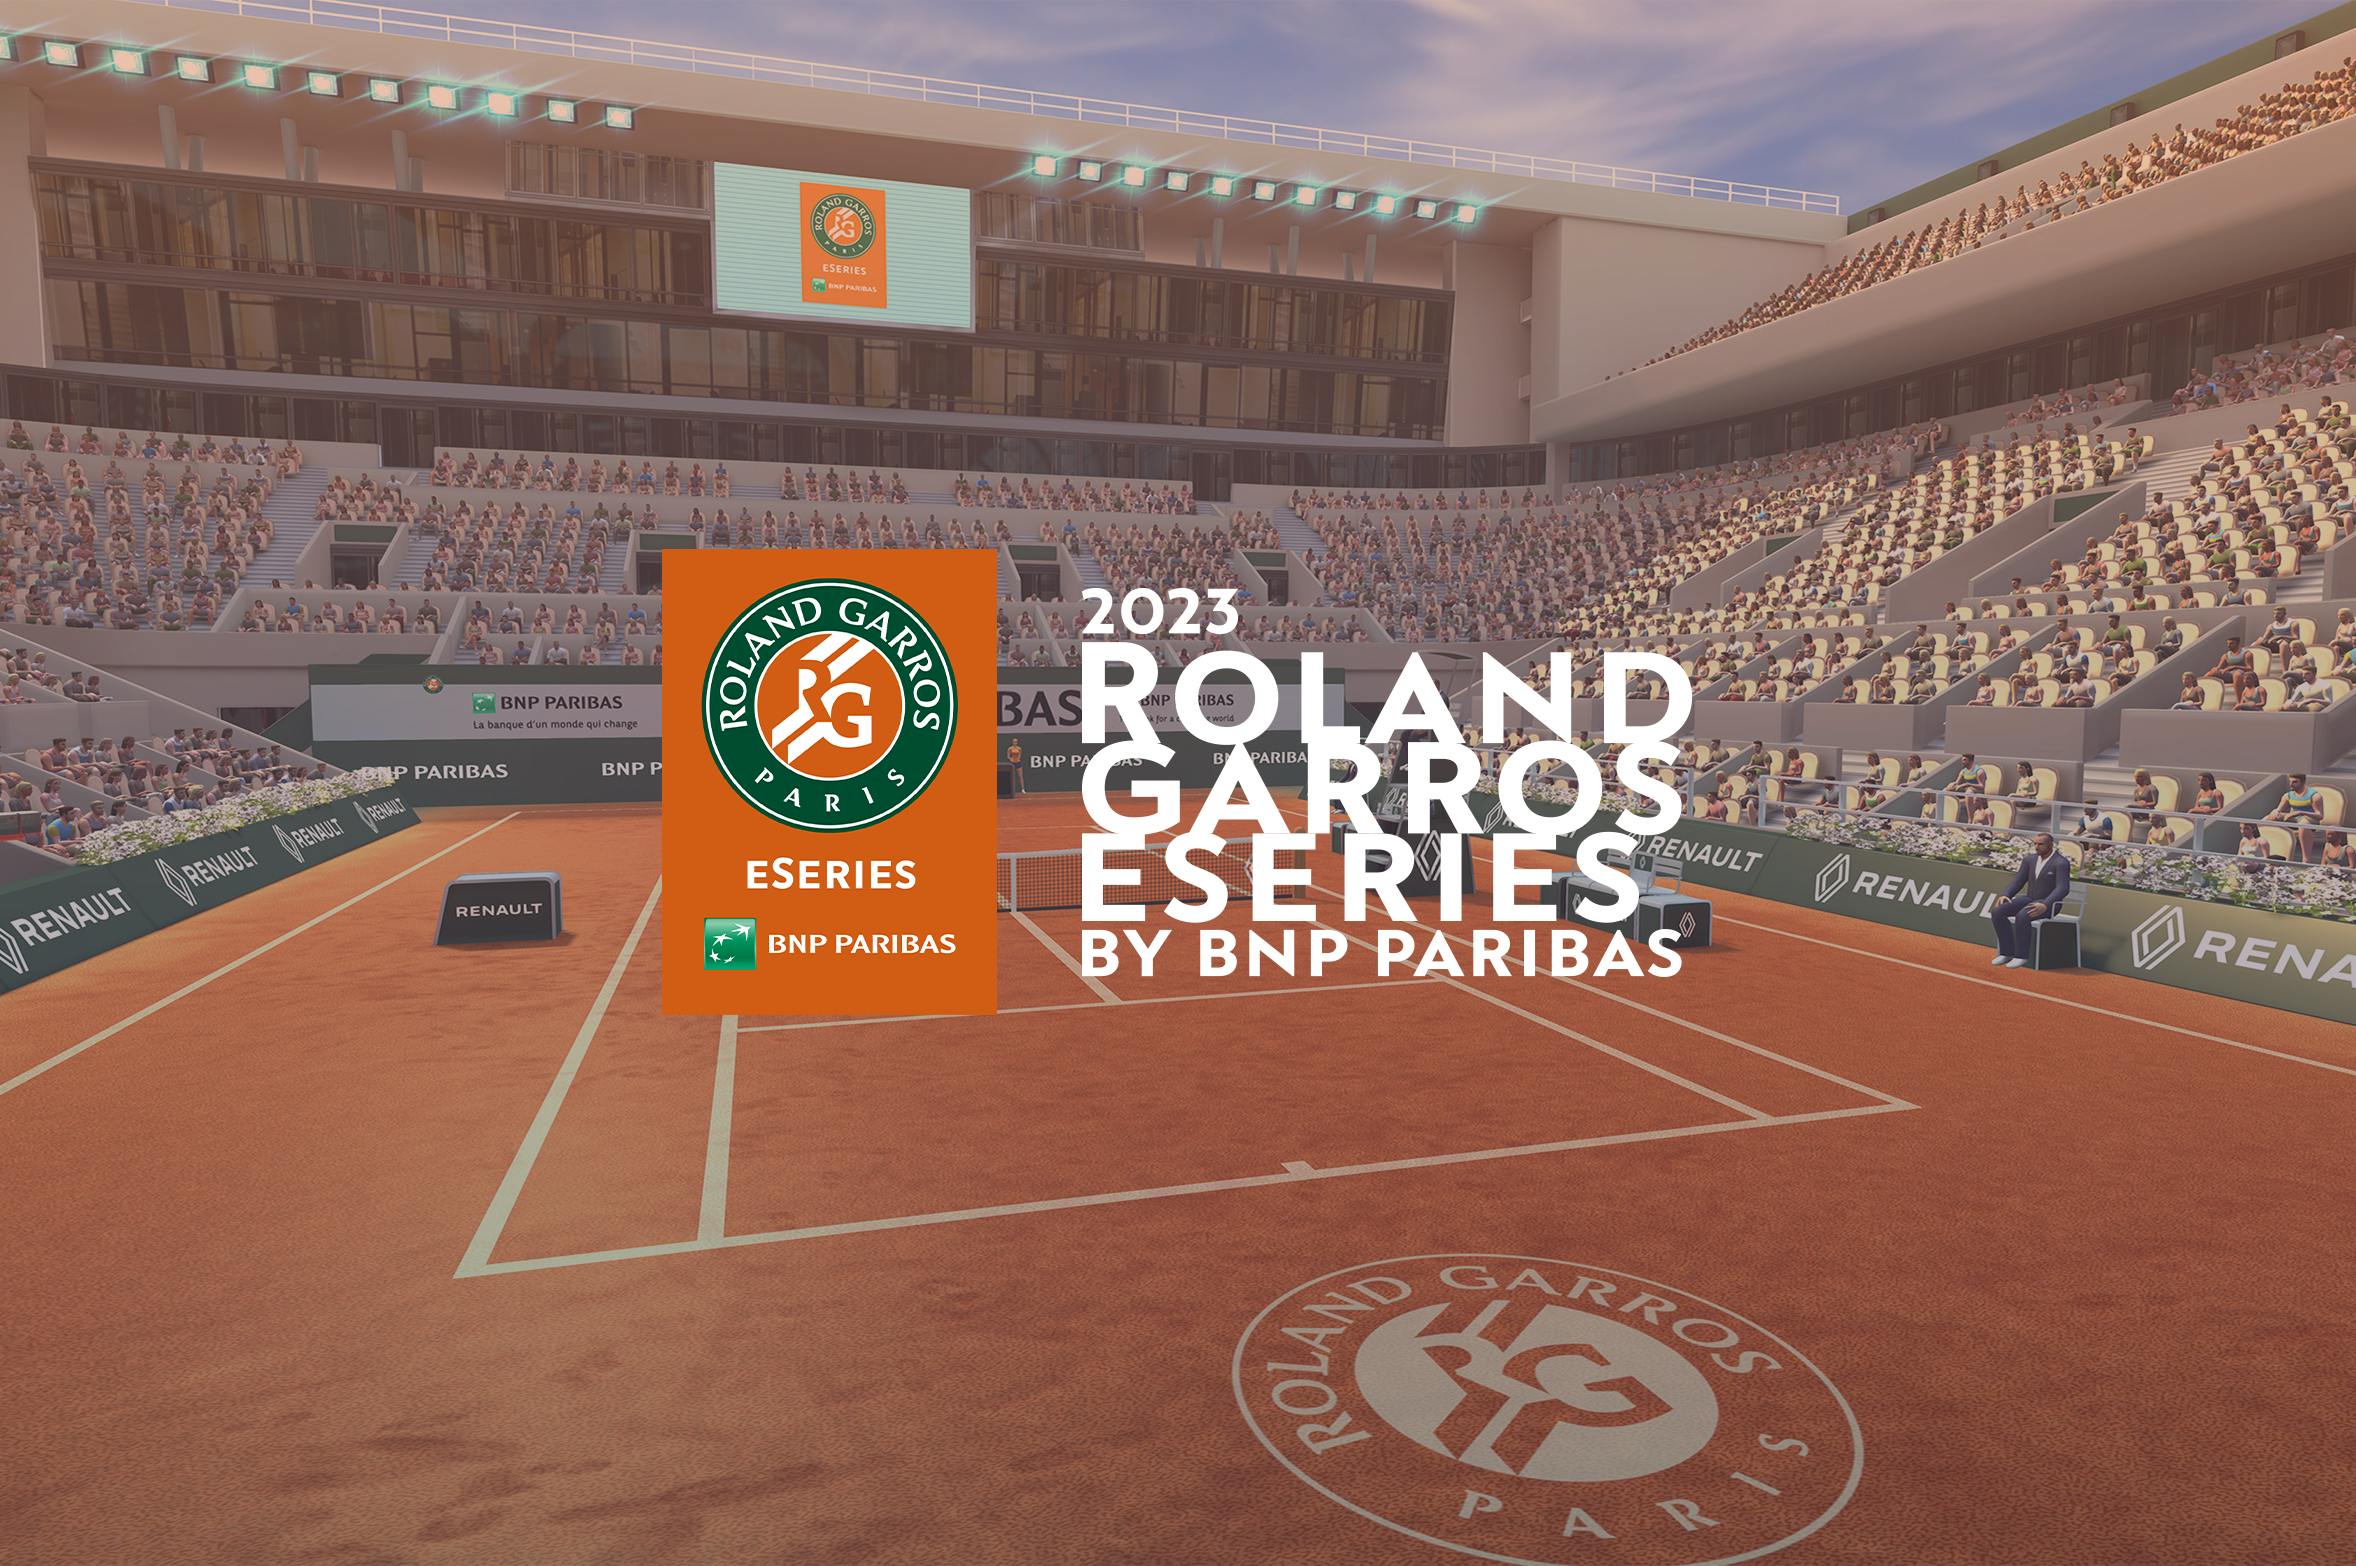 BNP Paribas and the Roland-Garros French Open – 50 years of a long  partnership - BNP Paribas